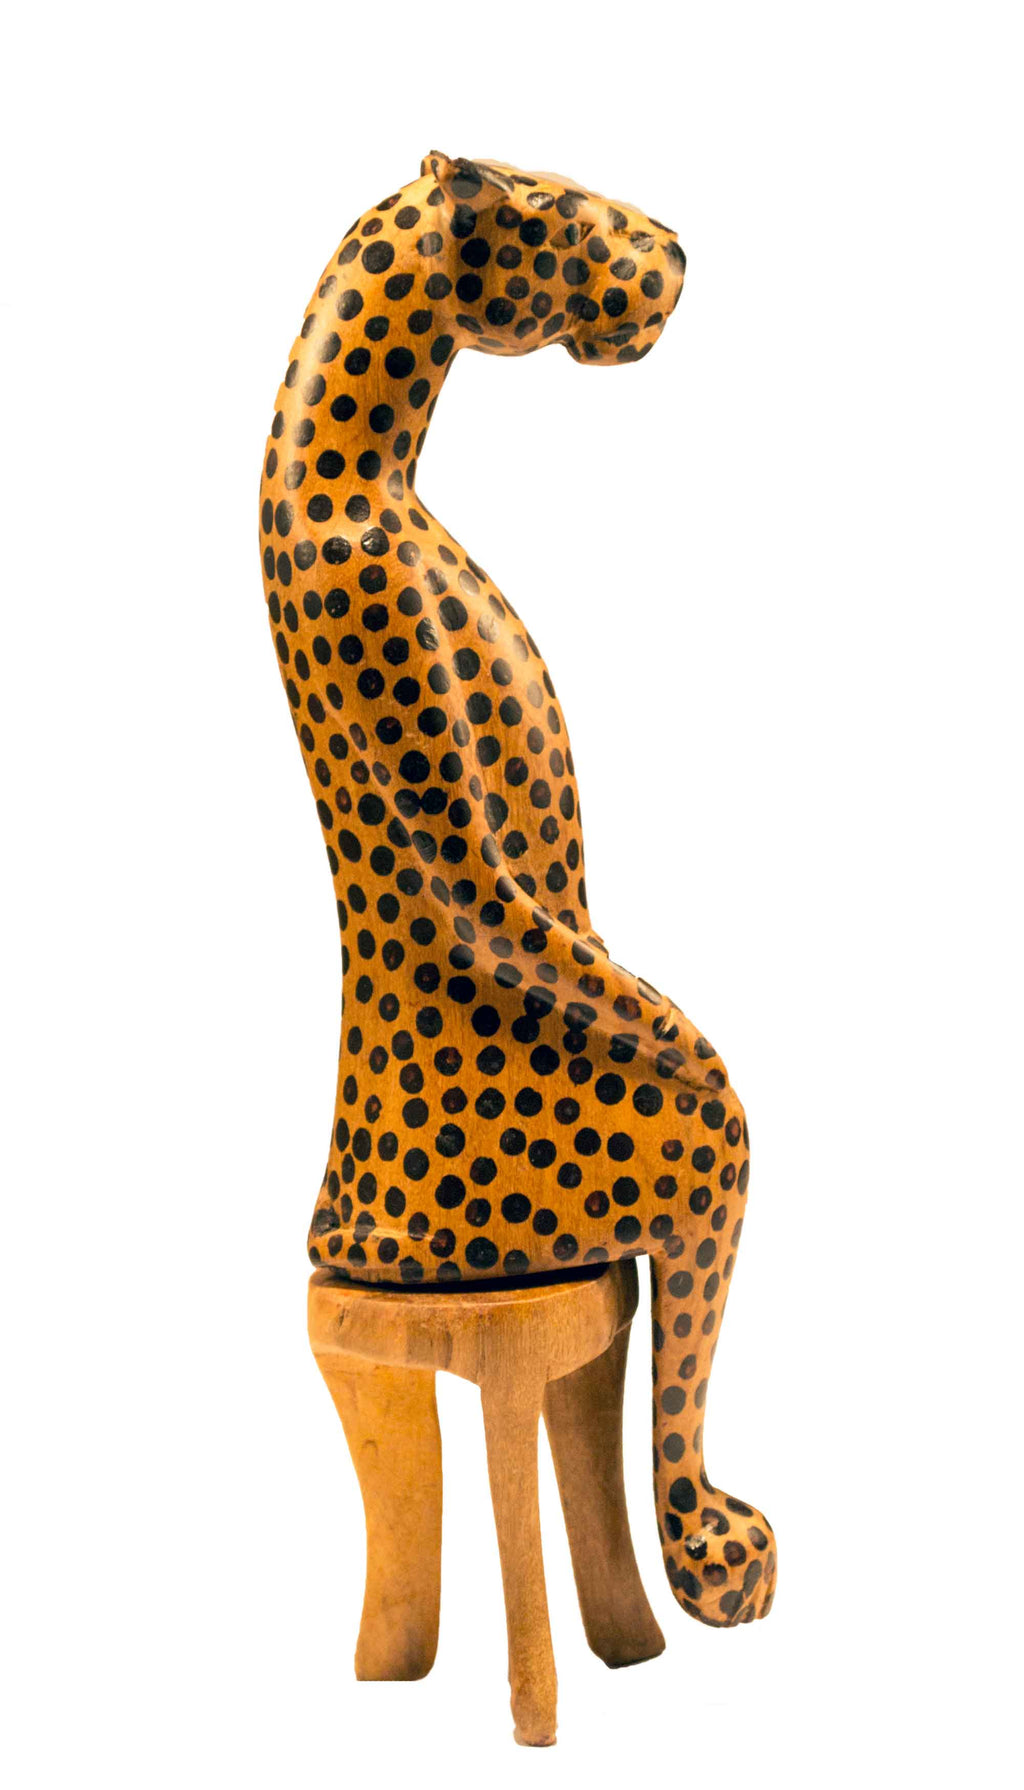 Cheetah, Profile view: Authentic Vintage Hand Carved & Hand Painted Teak Wood 'Animal Party' Figurine from Kenya